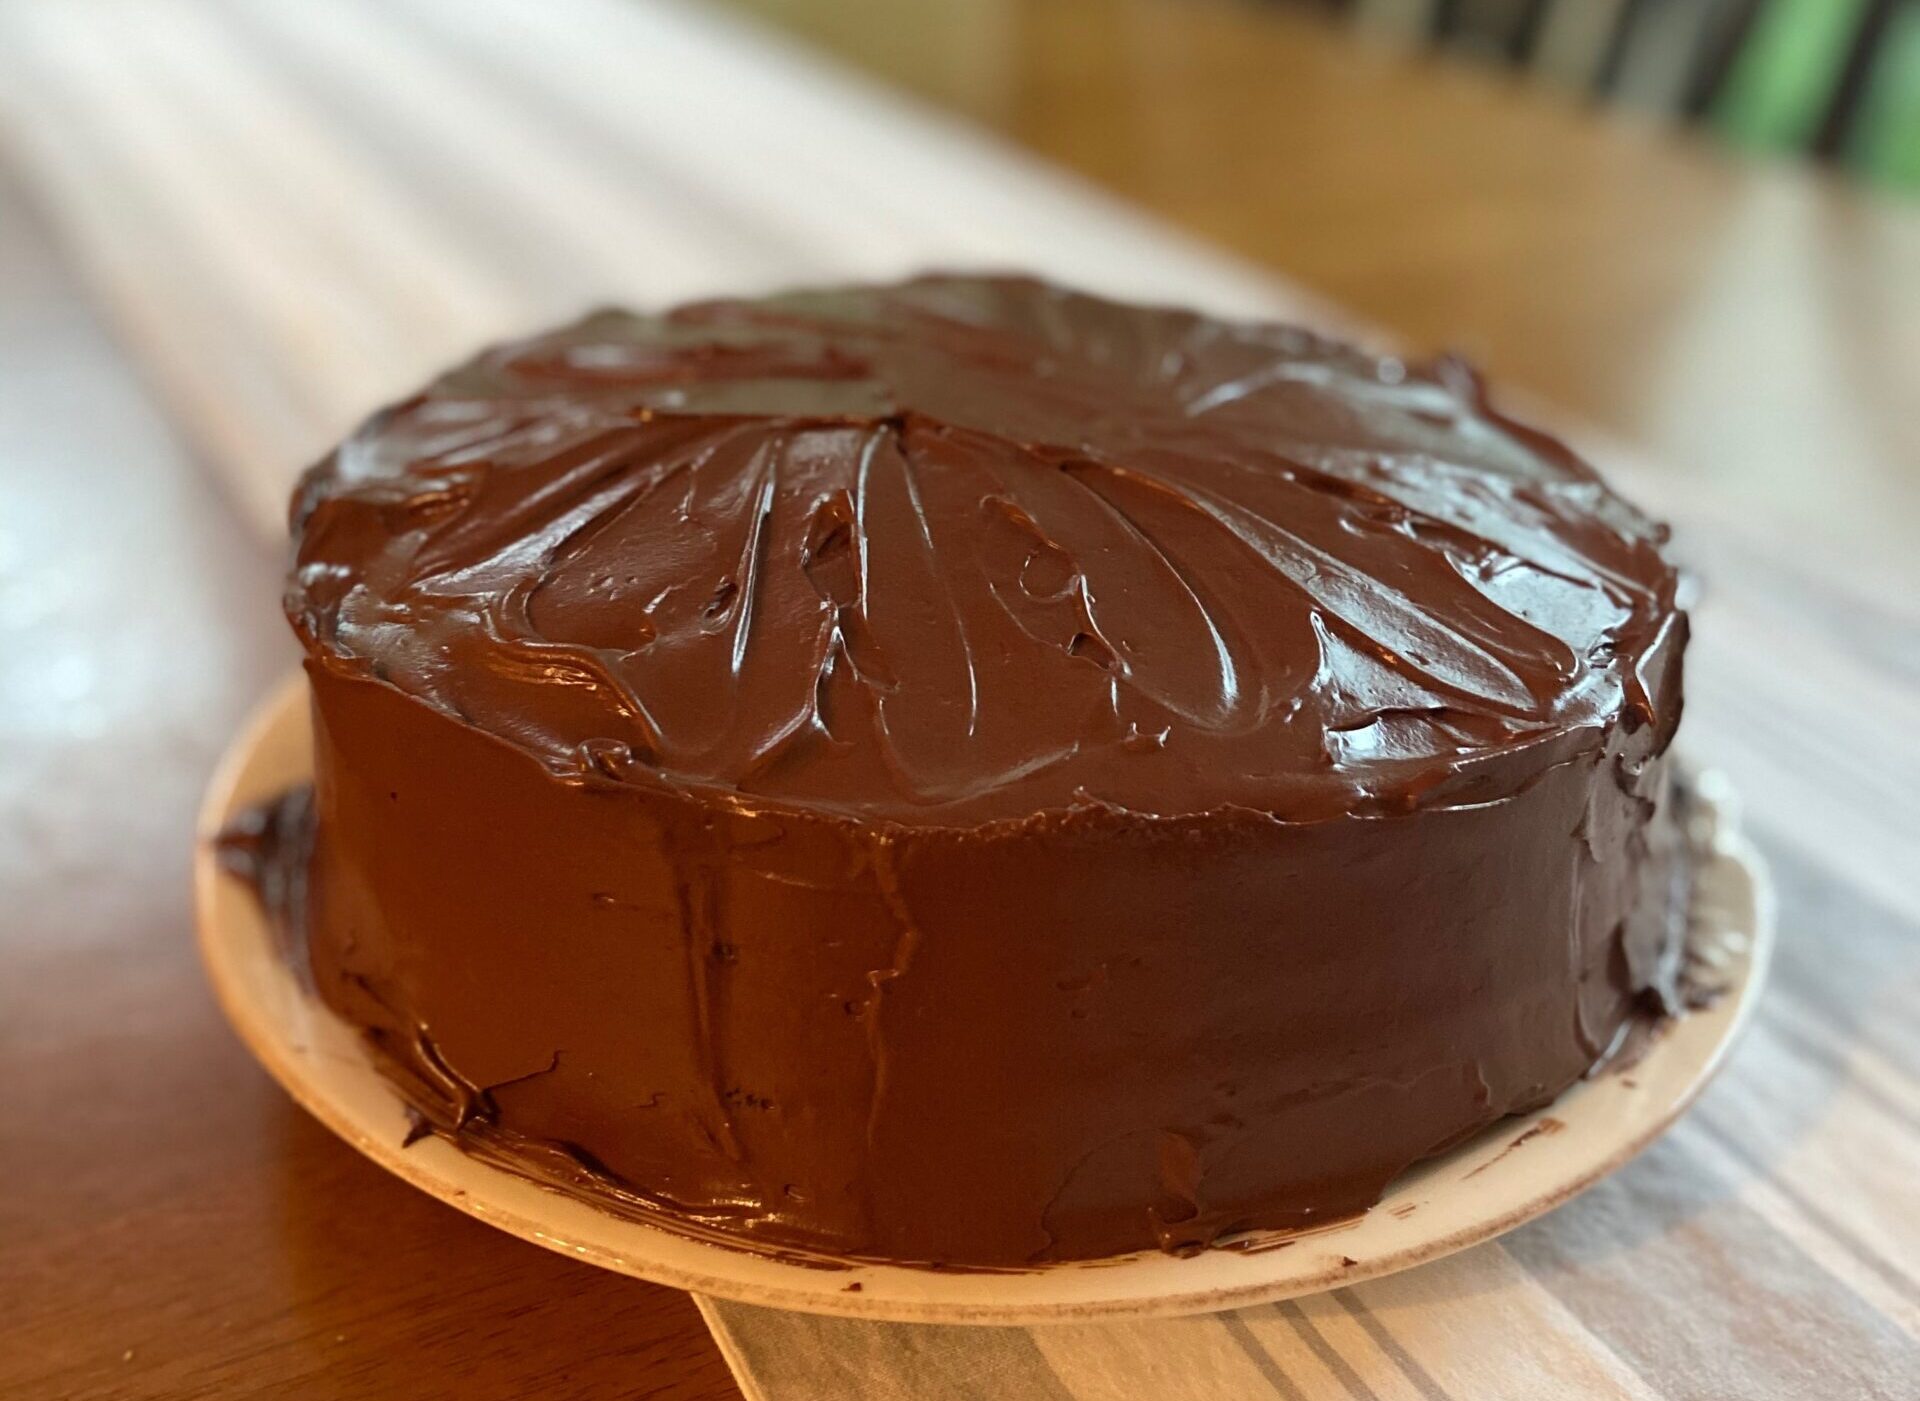 Best Ever Chocolate Cake, ‘Lower’ Calorie, and Healthier.